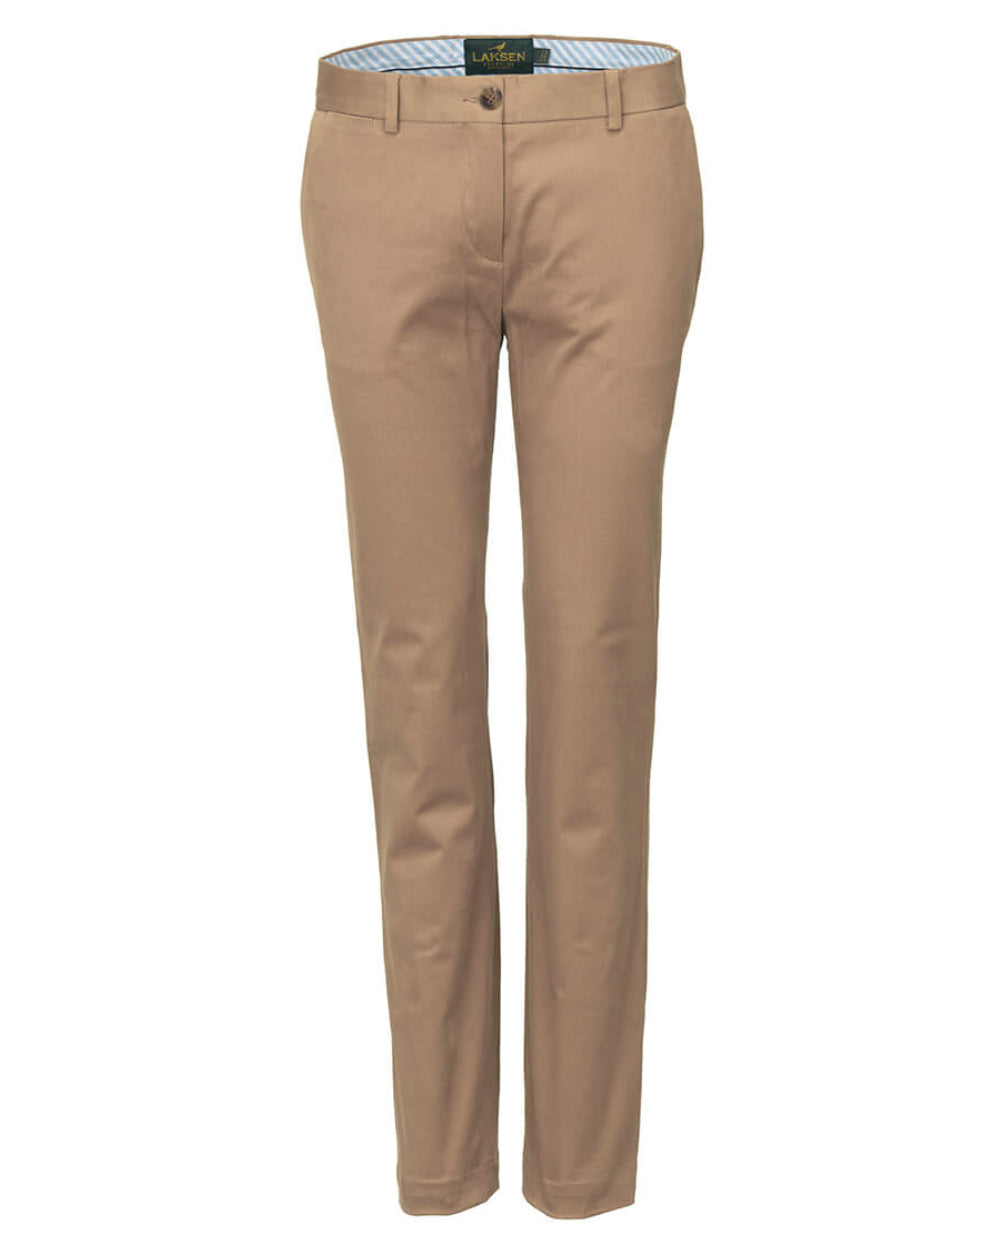 Sand Coloured Laksen Pennyton Chino Trousers On A White Background 